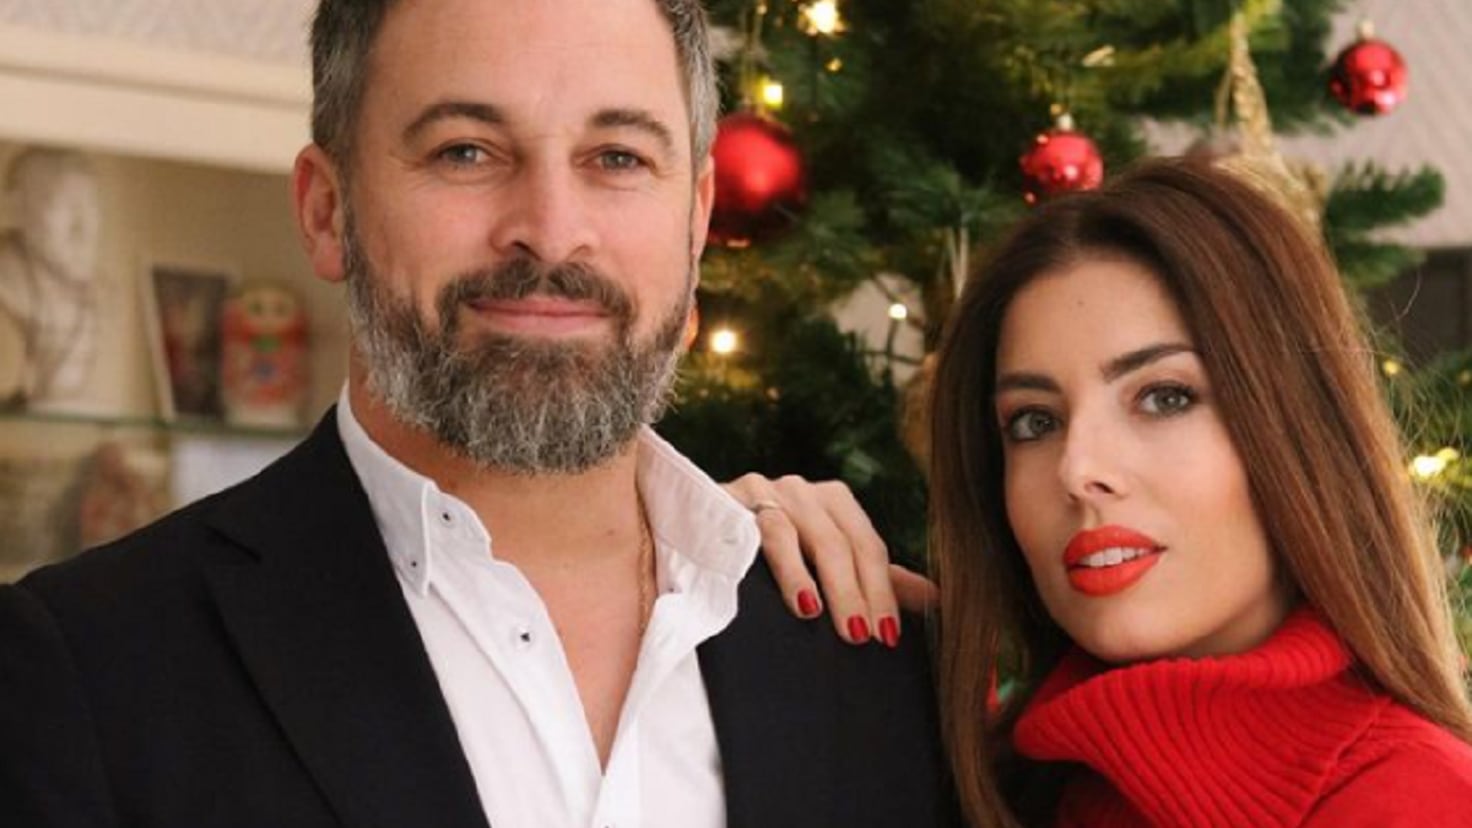 Santiago Abascal and Lidia Bedman are expecting their third child
